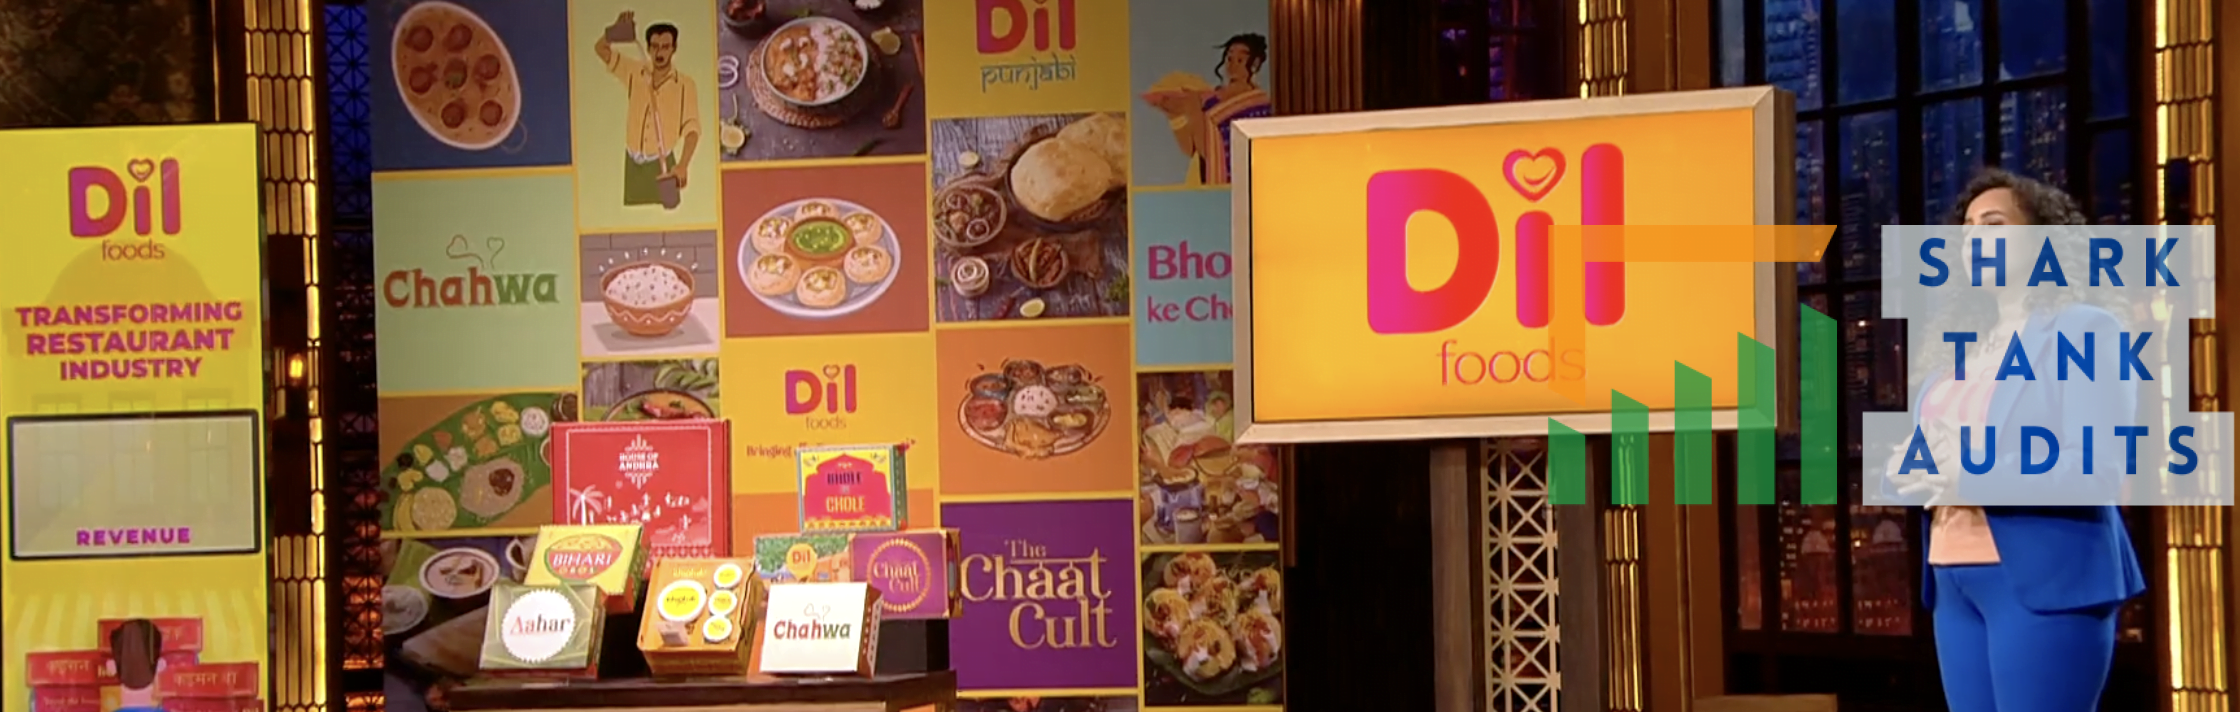 Dil Foods Shark Tank India Episode Review.